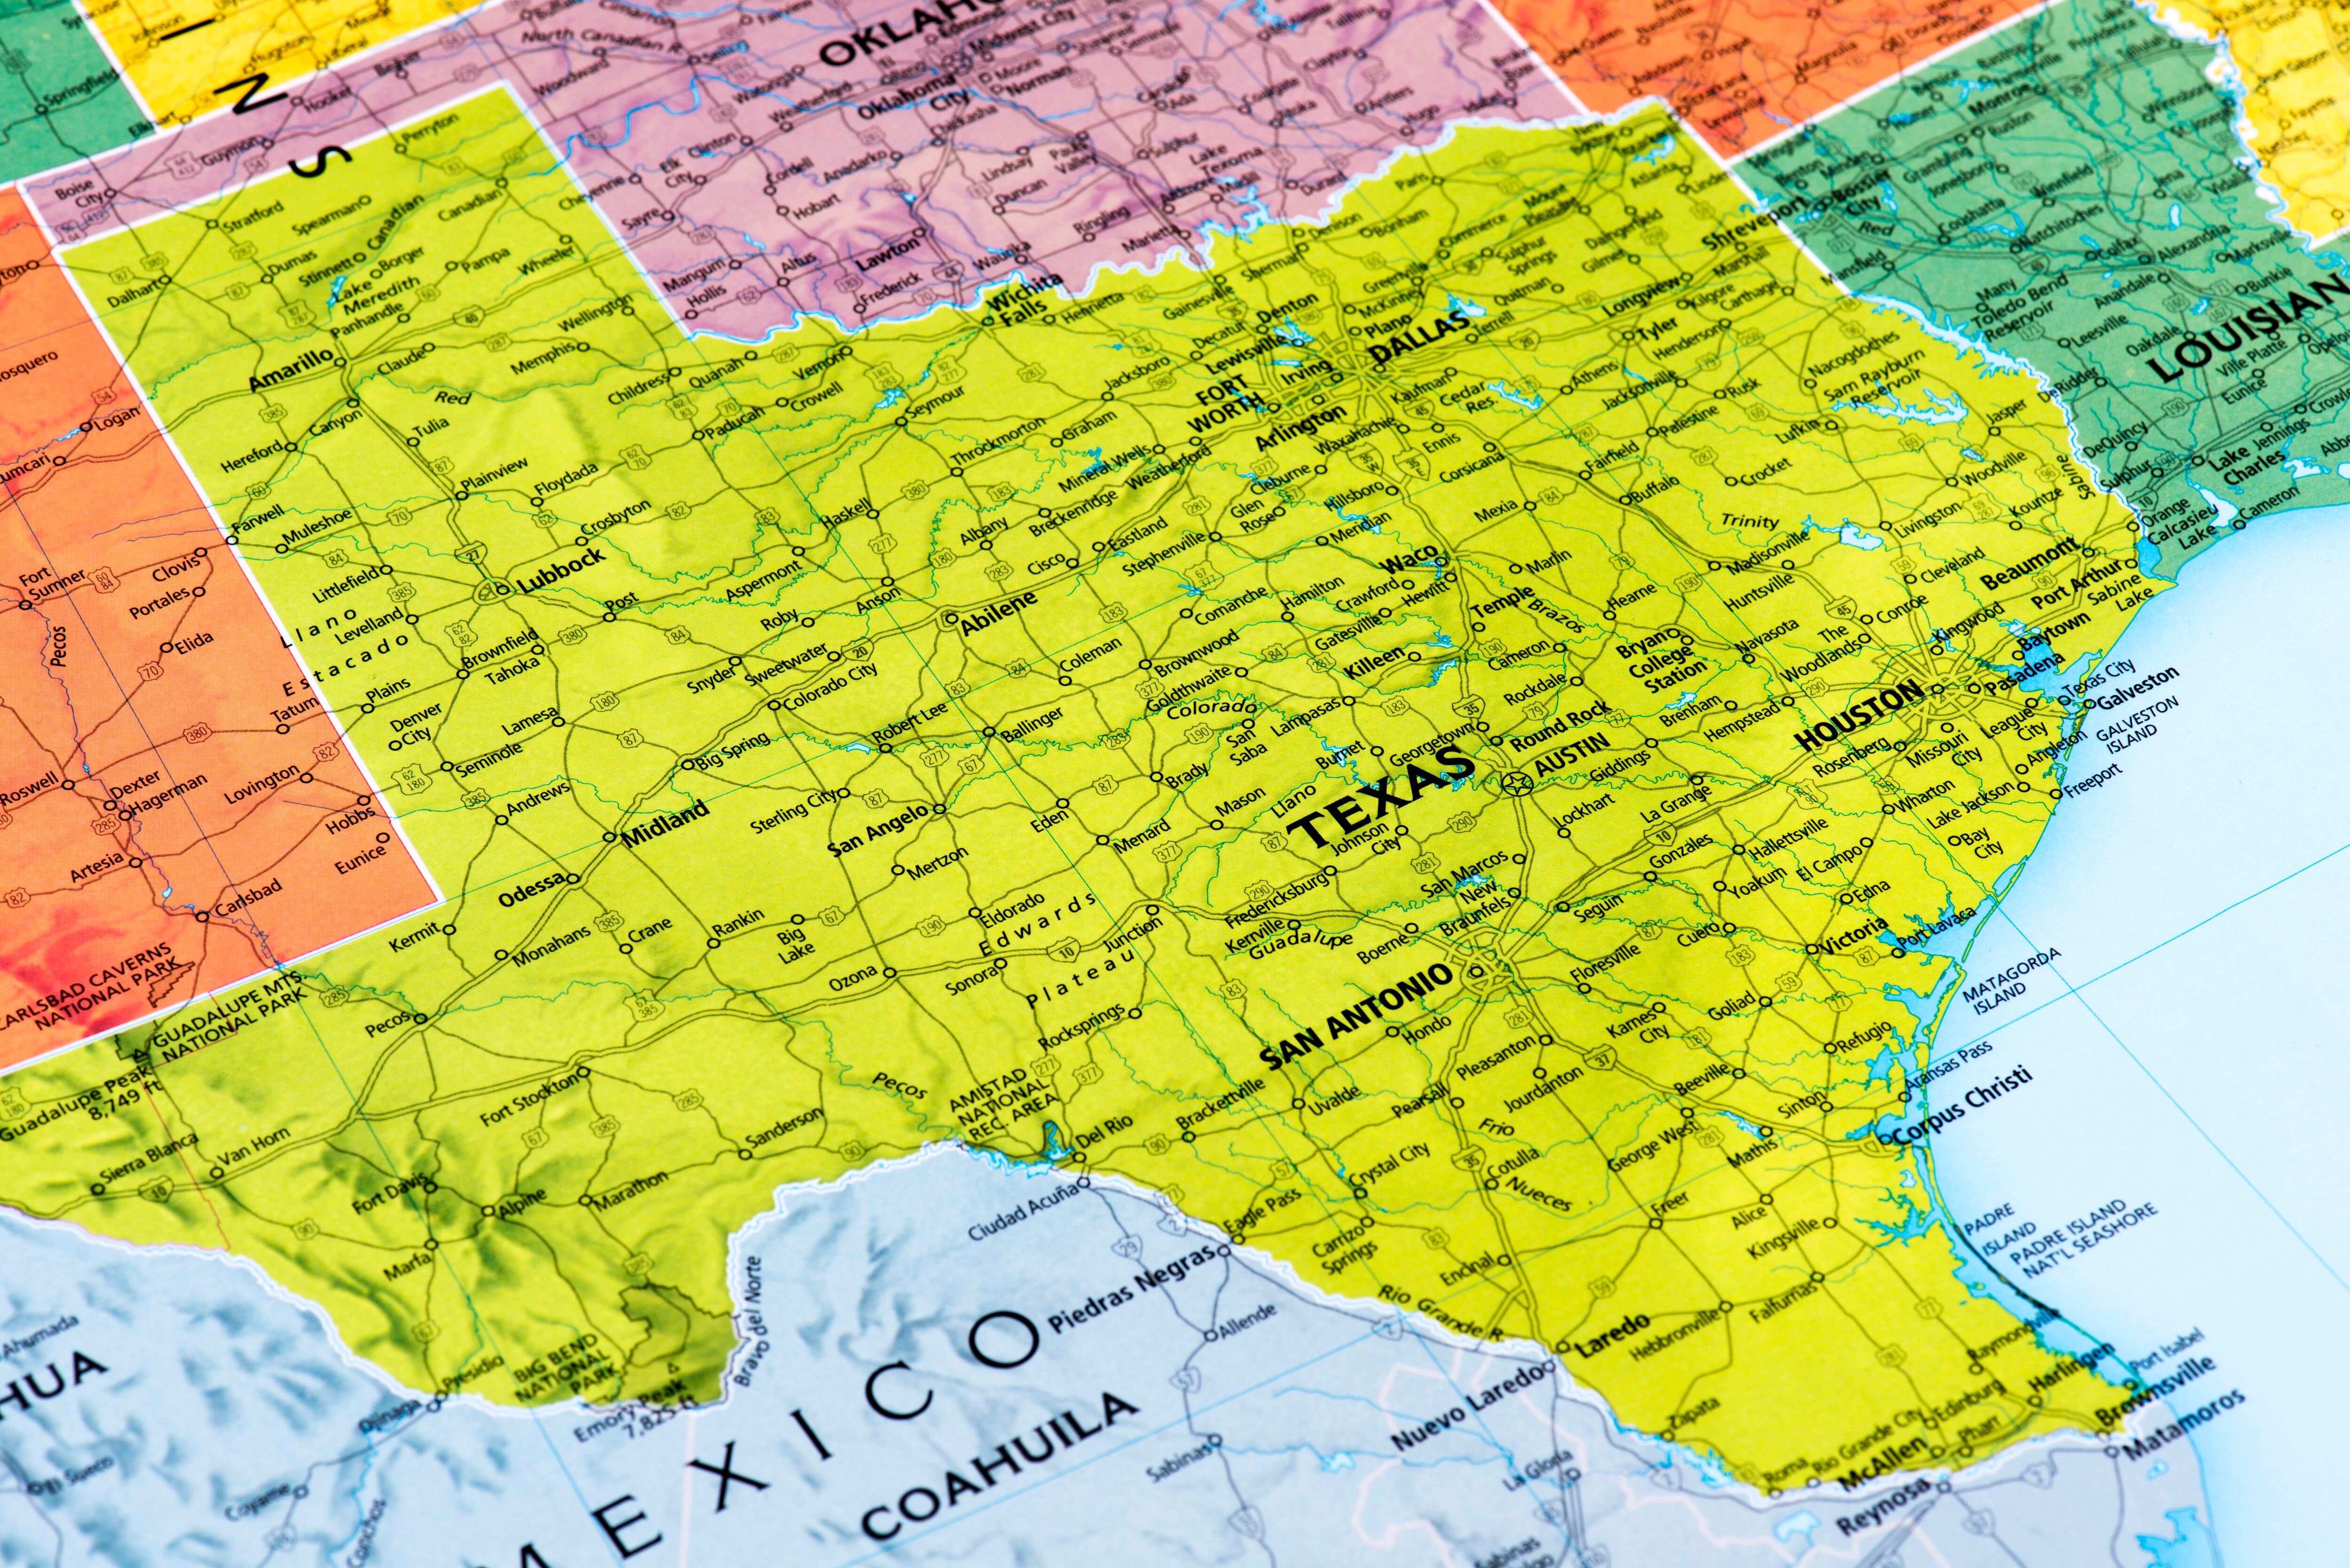 Texas boasts eight of the nation’s top 10 counties for population growth